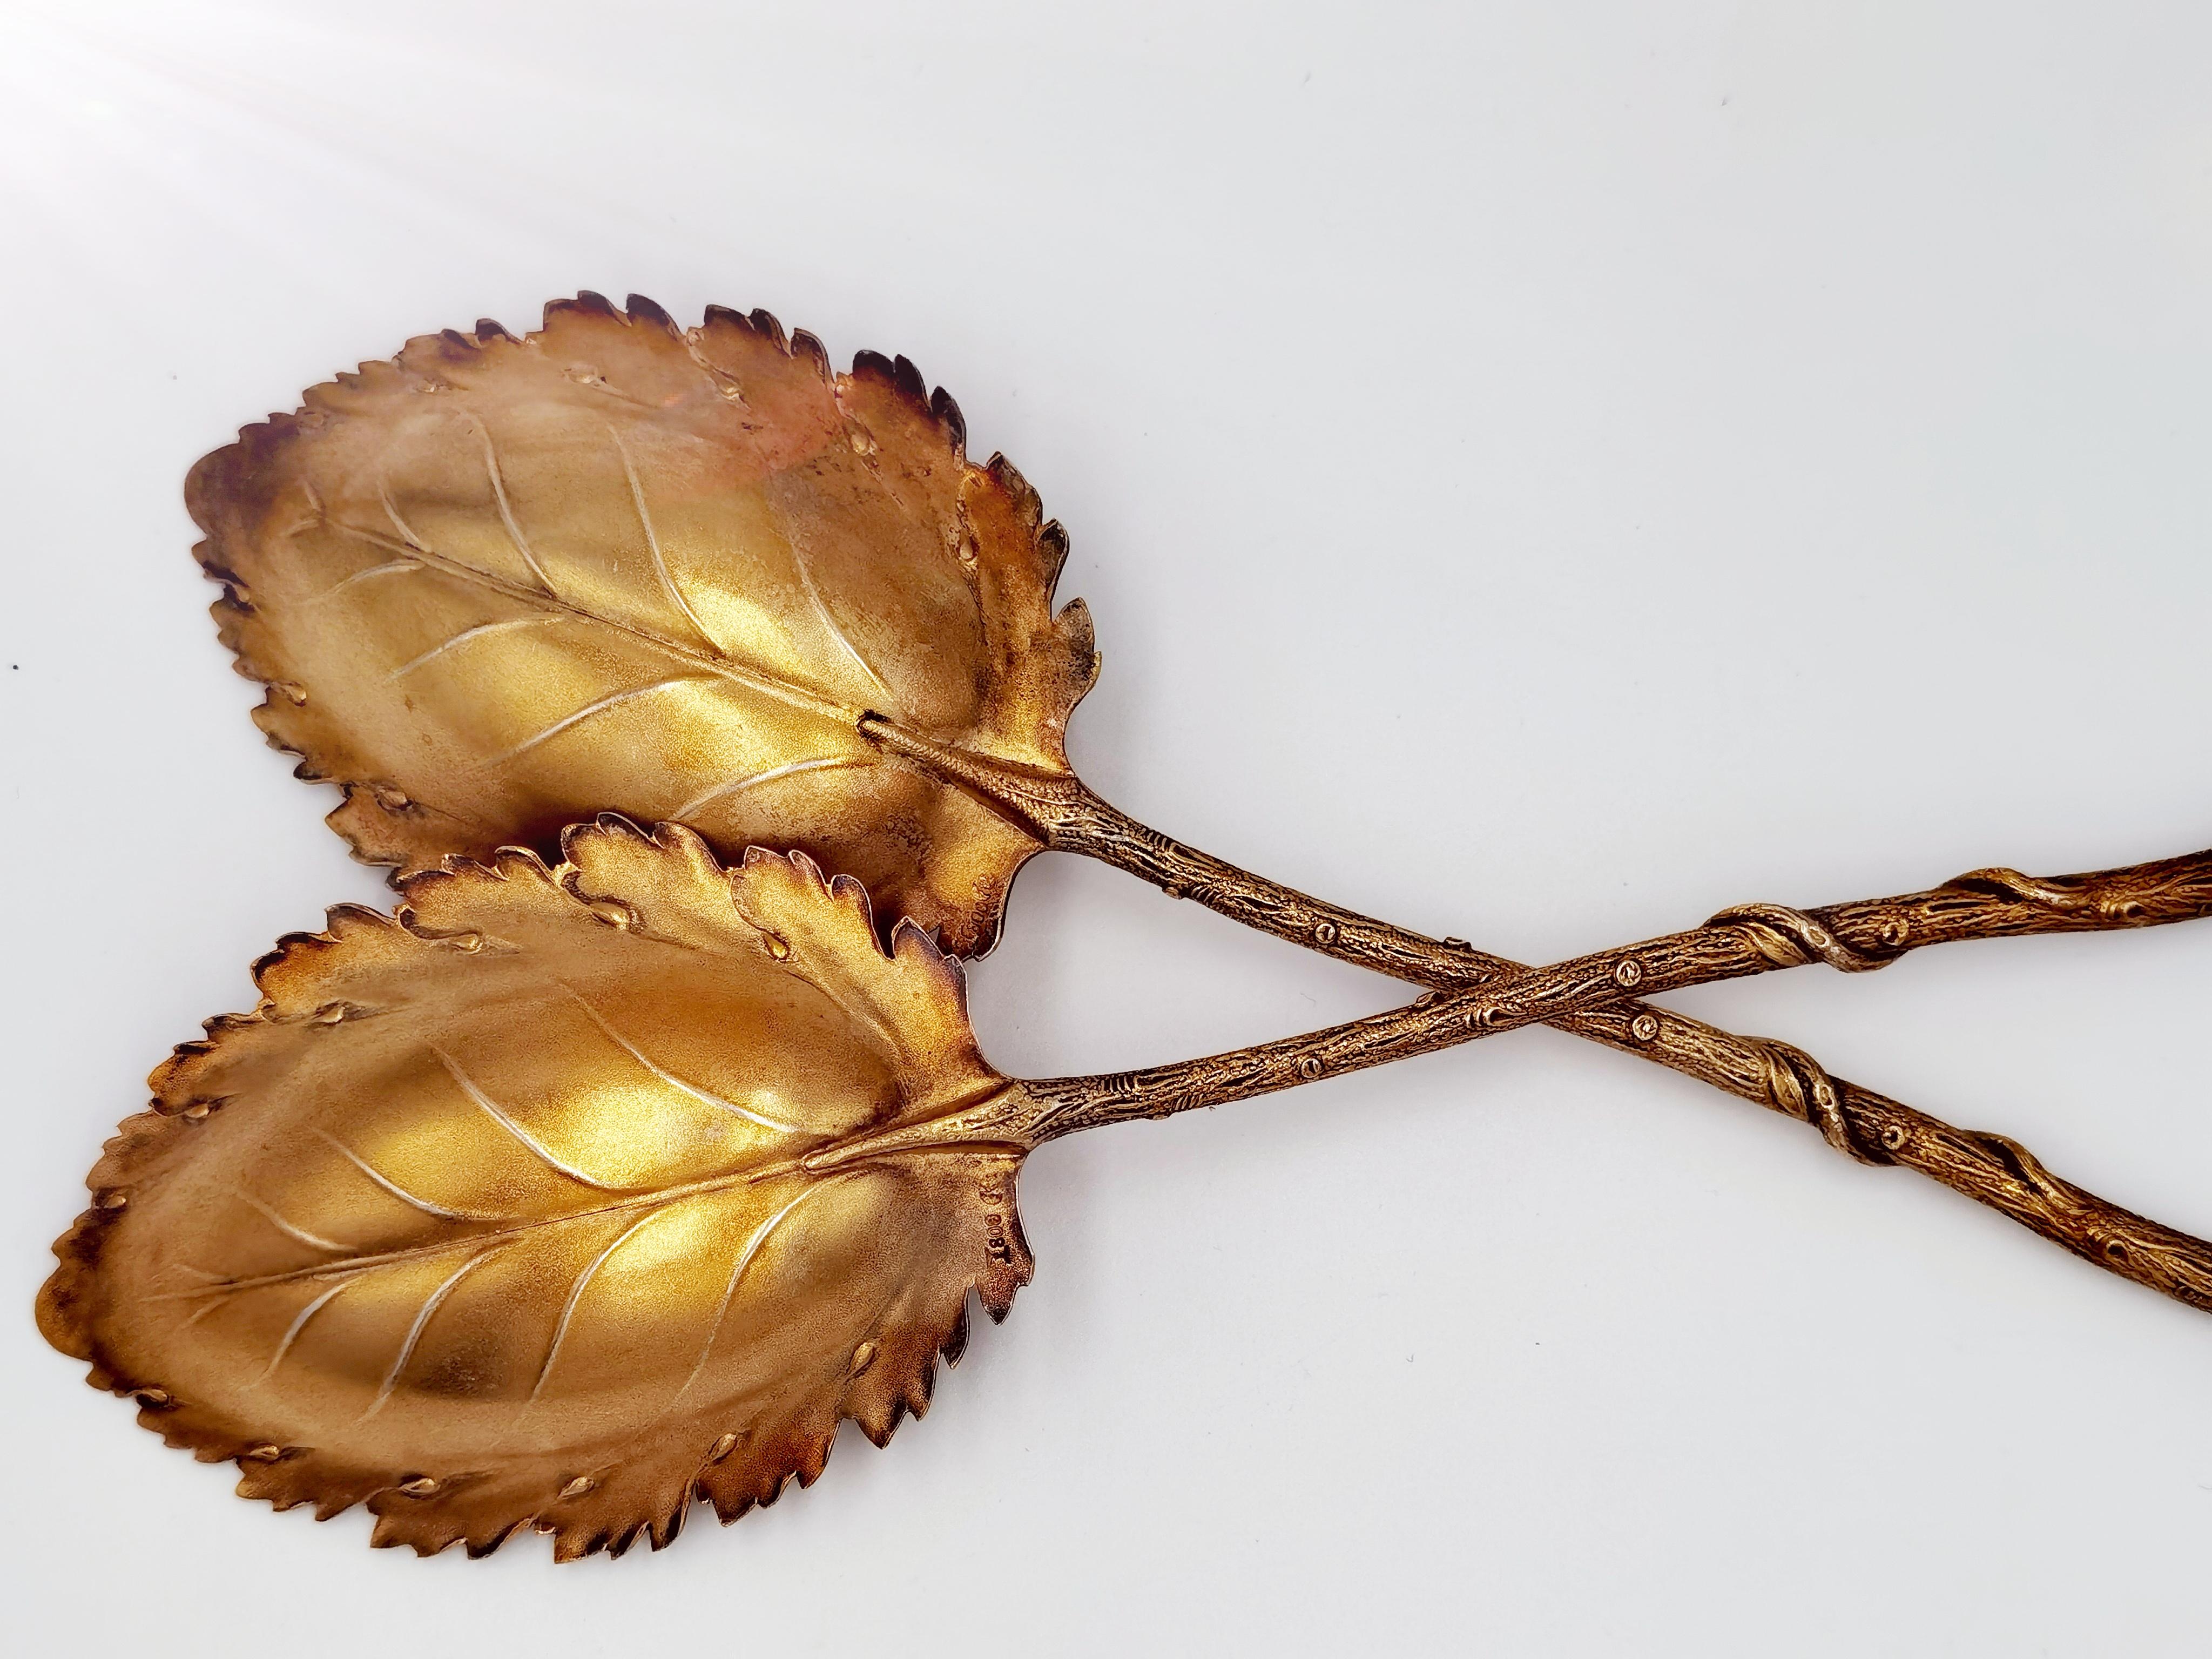 German set of 800 gilt silver salad servers in the shape of naturalistic leaves with branches. Manufactured about 1900 in Germany. Stamped 800 silver. About 160 gram.